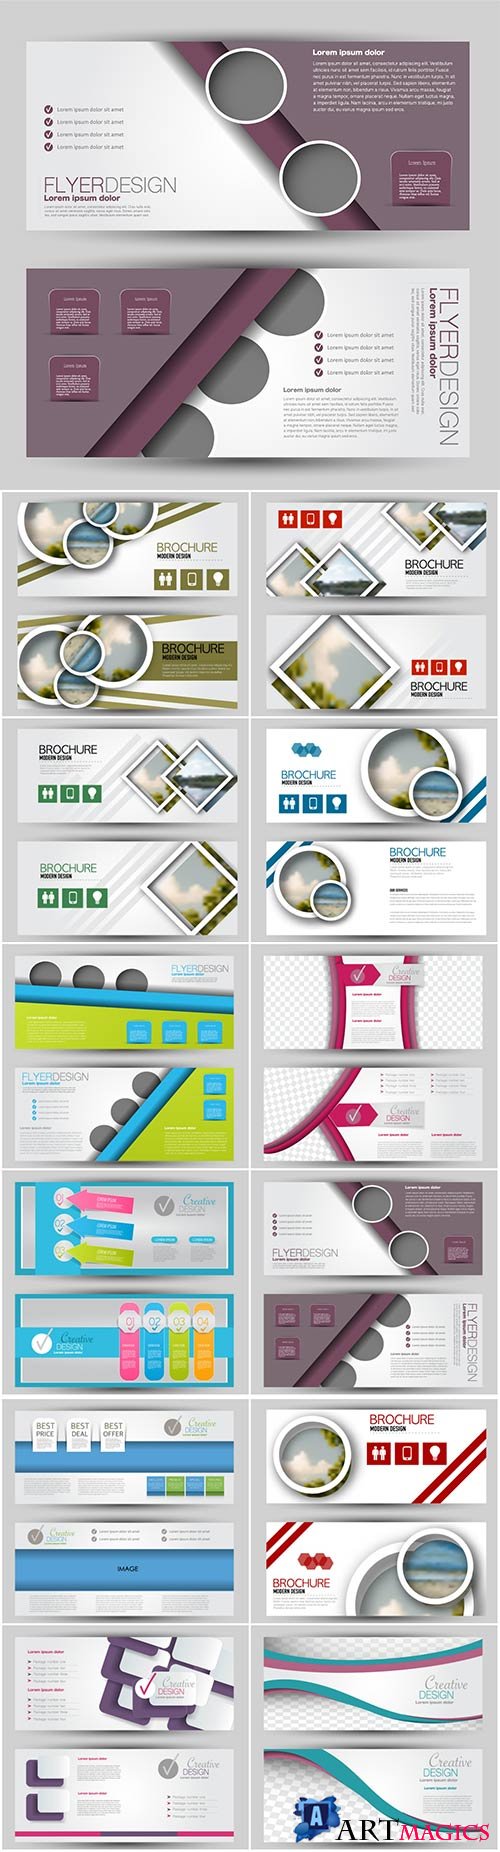 Set of banners for web and advertisement print out, vector horizontal flyer handout design # 3